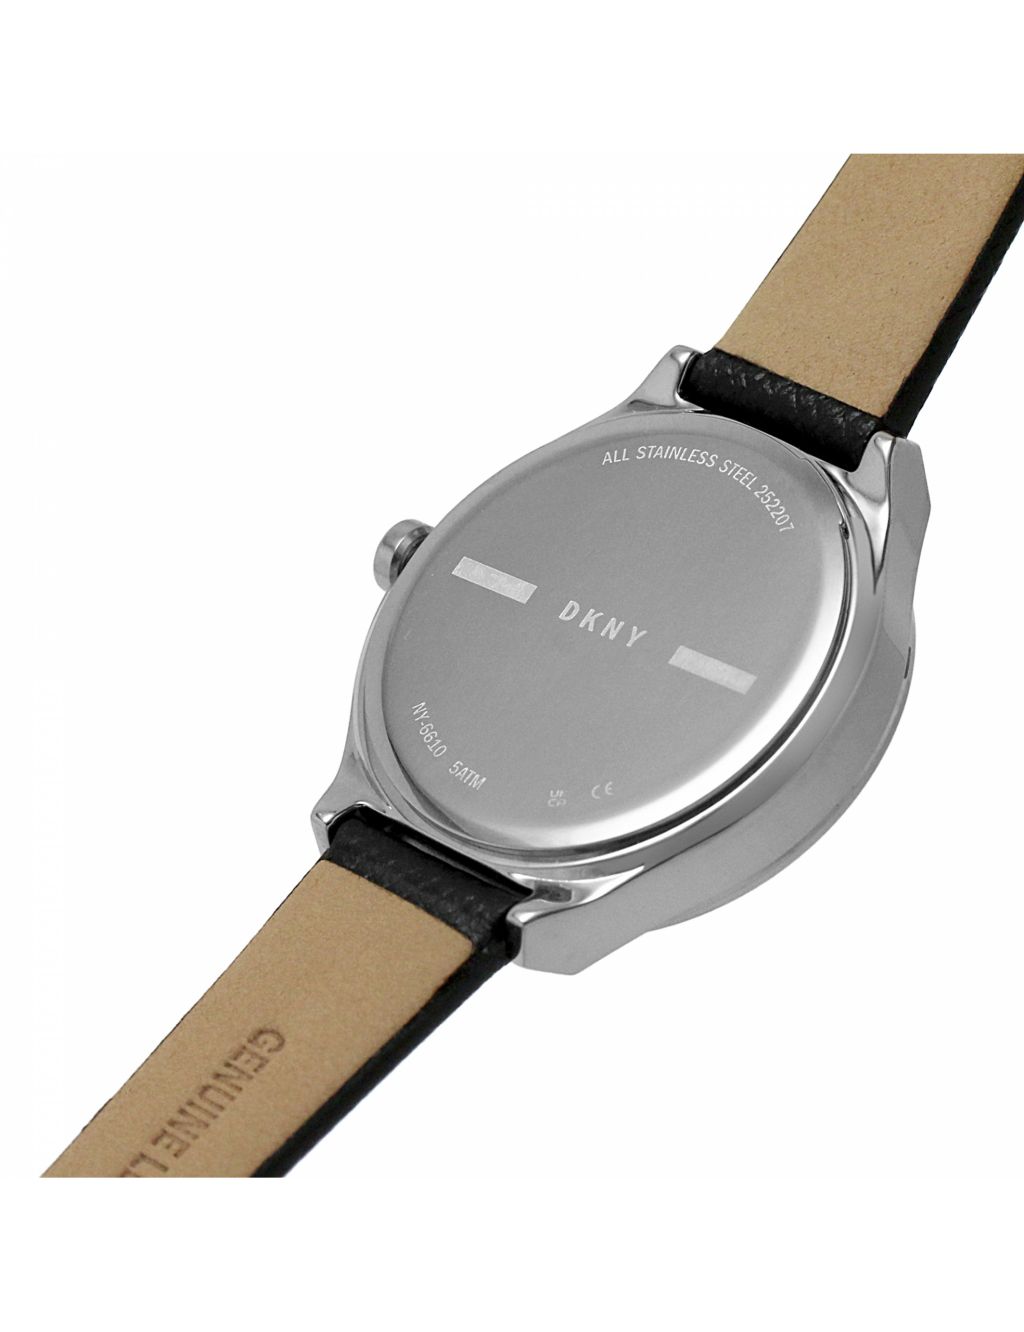 DKNY Parsons Black Leather Watch image 6